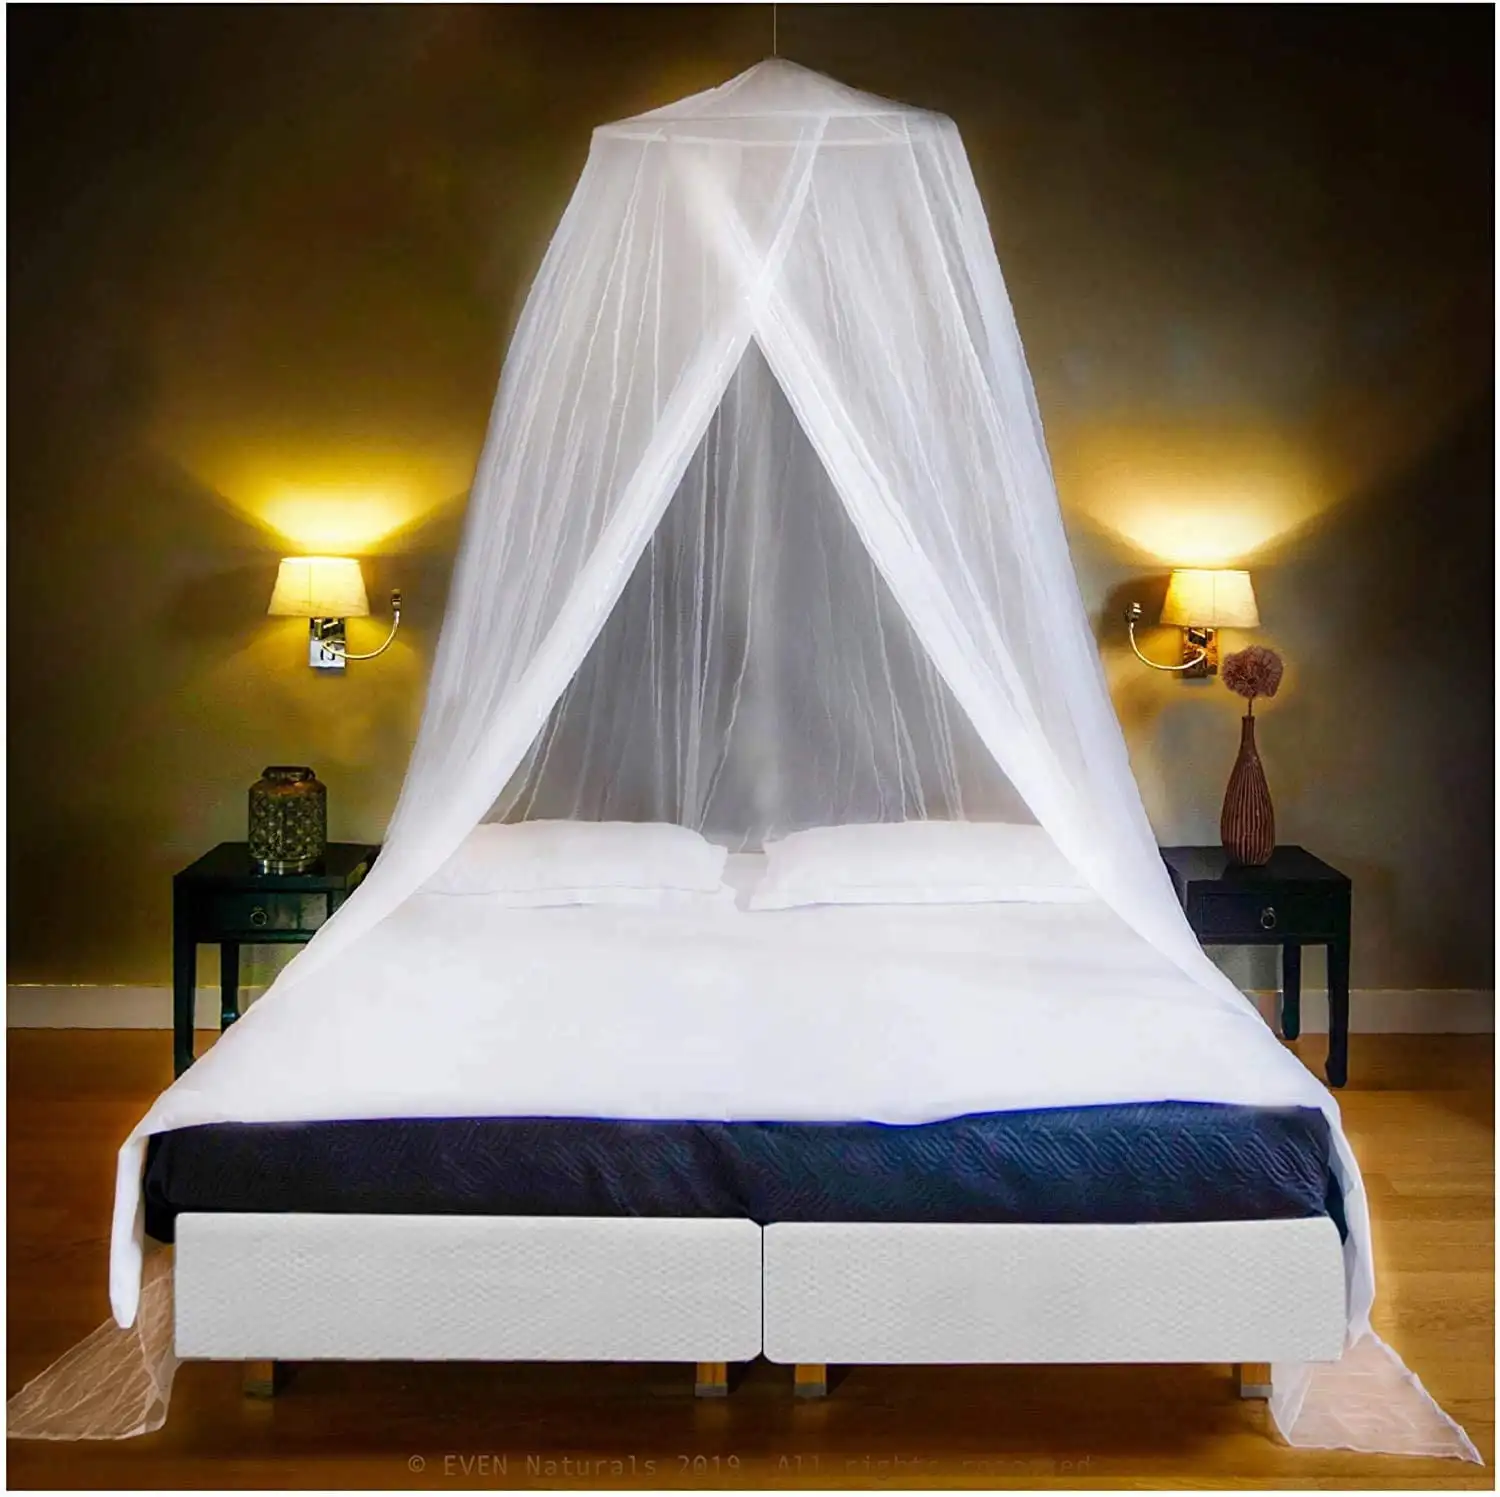 

Luxury Mosquito Net Bed , Ultra Large Bug Net Single to Size, Quick Easy Installation, Finest Holes Mesh 380, Curtain Netting